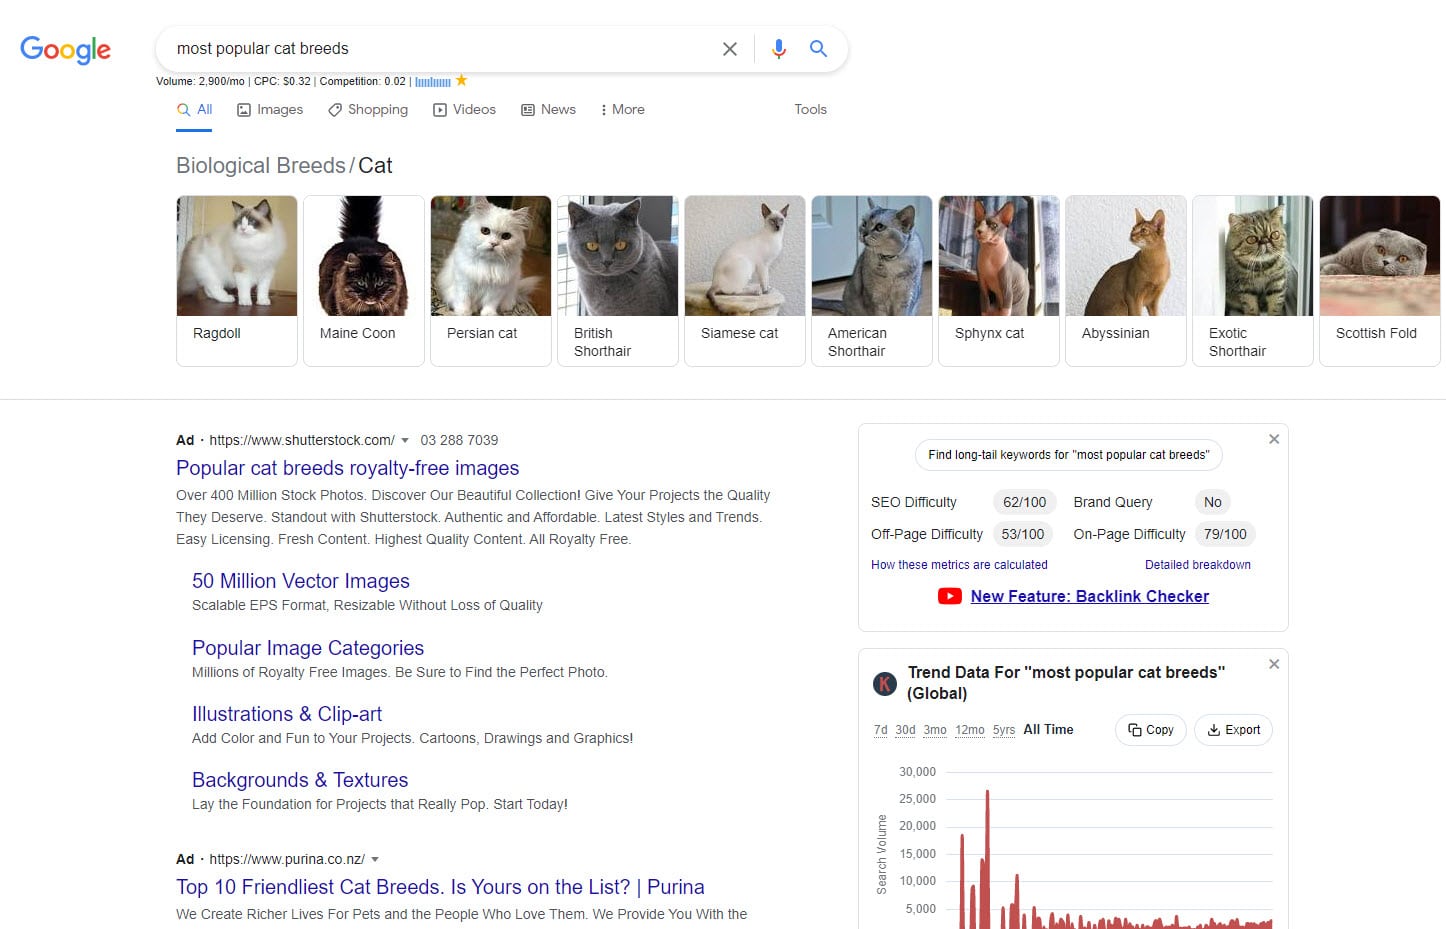 Searching "most popular cat breeds" on Google